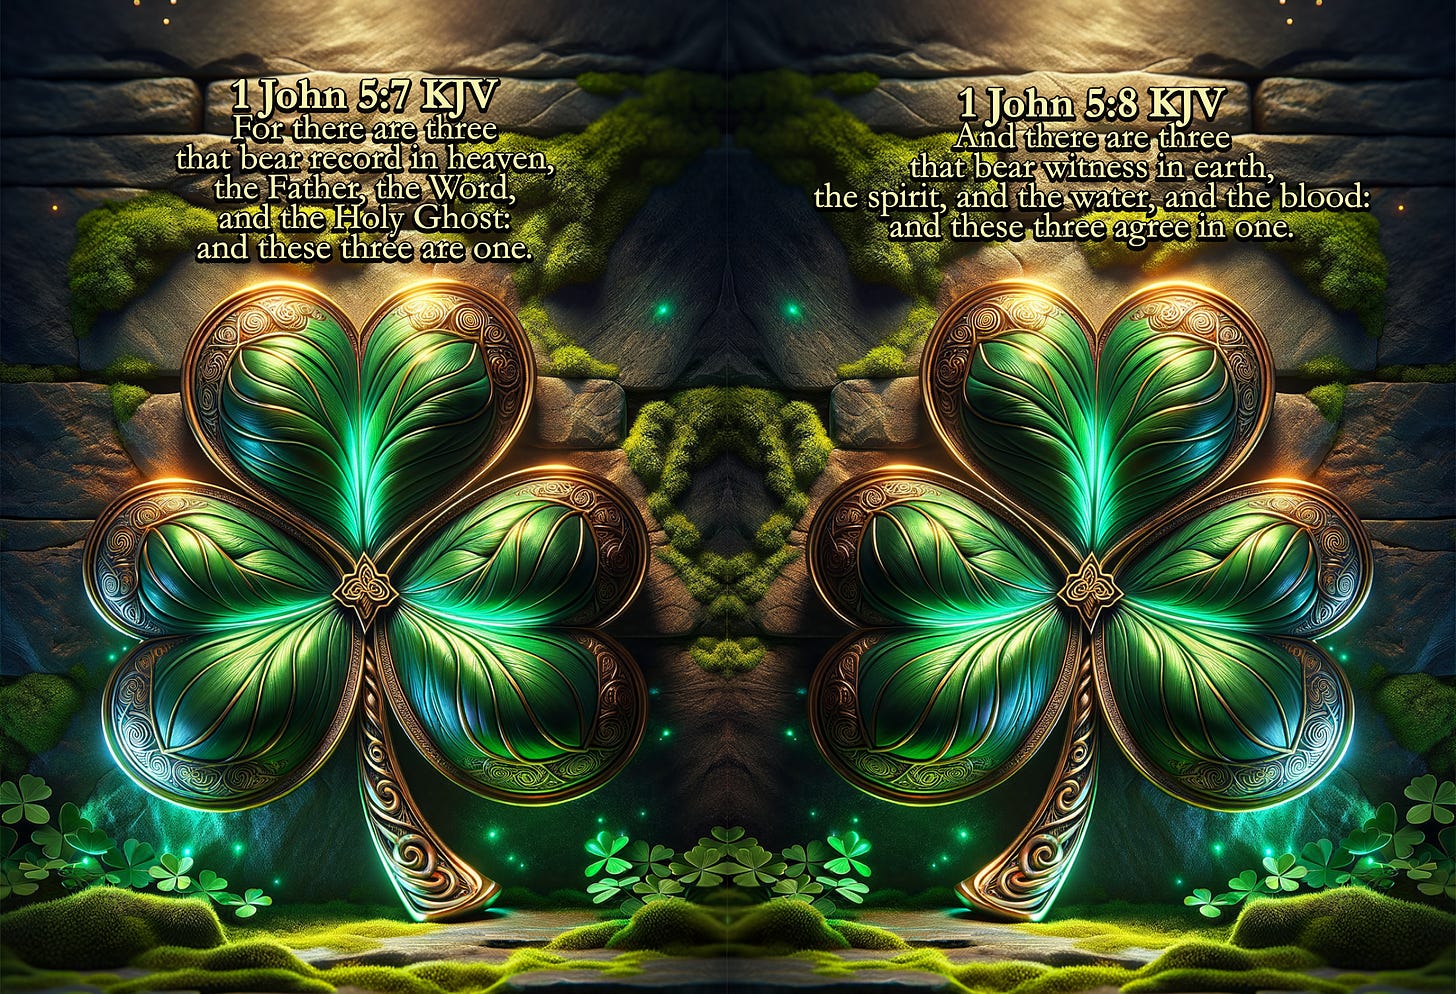 This is a richly detailed digital artwork that features a symmetrical design with a central motif resembling a stylized four-leaf clover, set against a backdrop that gives the impression of a rocky cave interior.  The clover leaves are ornately designed with intricate, swirling patterns that suggest a blend of organic and metallic textures. Each leaf has a luminous quality, with glowing edges and what appears to be a light source emanating from the center, casting a gentle green light onto the surrounding surfaces. The leaves are colored in various shades of green with golden embellishments that highlight the swirling designs.  The background is darker, featuring what looks like moss-covered rocks with small, round, green plants that could be interpreted as clover or moss patches. The composition has a mirrored quality, suggesting symmetry along the vertical axis. There's a mystical or ethereal atmosphere to the scene, possibly evoking a sense of nature combined with fantasy.  Overlaying the image on the left and right sides are blocks of text, which are scripture references from the King James Version of the Bible. On the left, 1 John 5:7 speaks of a trinity in heaven, referencing the Father, the Word, and the Holy Ghost. On the right, 1 John 5:8 complements this by mentioning a trinity on earth, the spirit, the water, and the blood, with both verses ending with the affirmation that these three agree in one.  The overall impression is one of a deeply symbolic and spiritual message, conveyed through a visual motif that might be associated with Irish or Celtic culture, given the resemblance to a four-leaf clover and the use of green, which is often related to those themes. The art could be interpreted as representing the spiritual connection between heaven and earth, with the clover uniting the elements of both realms in its design.